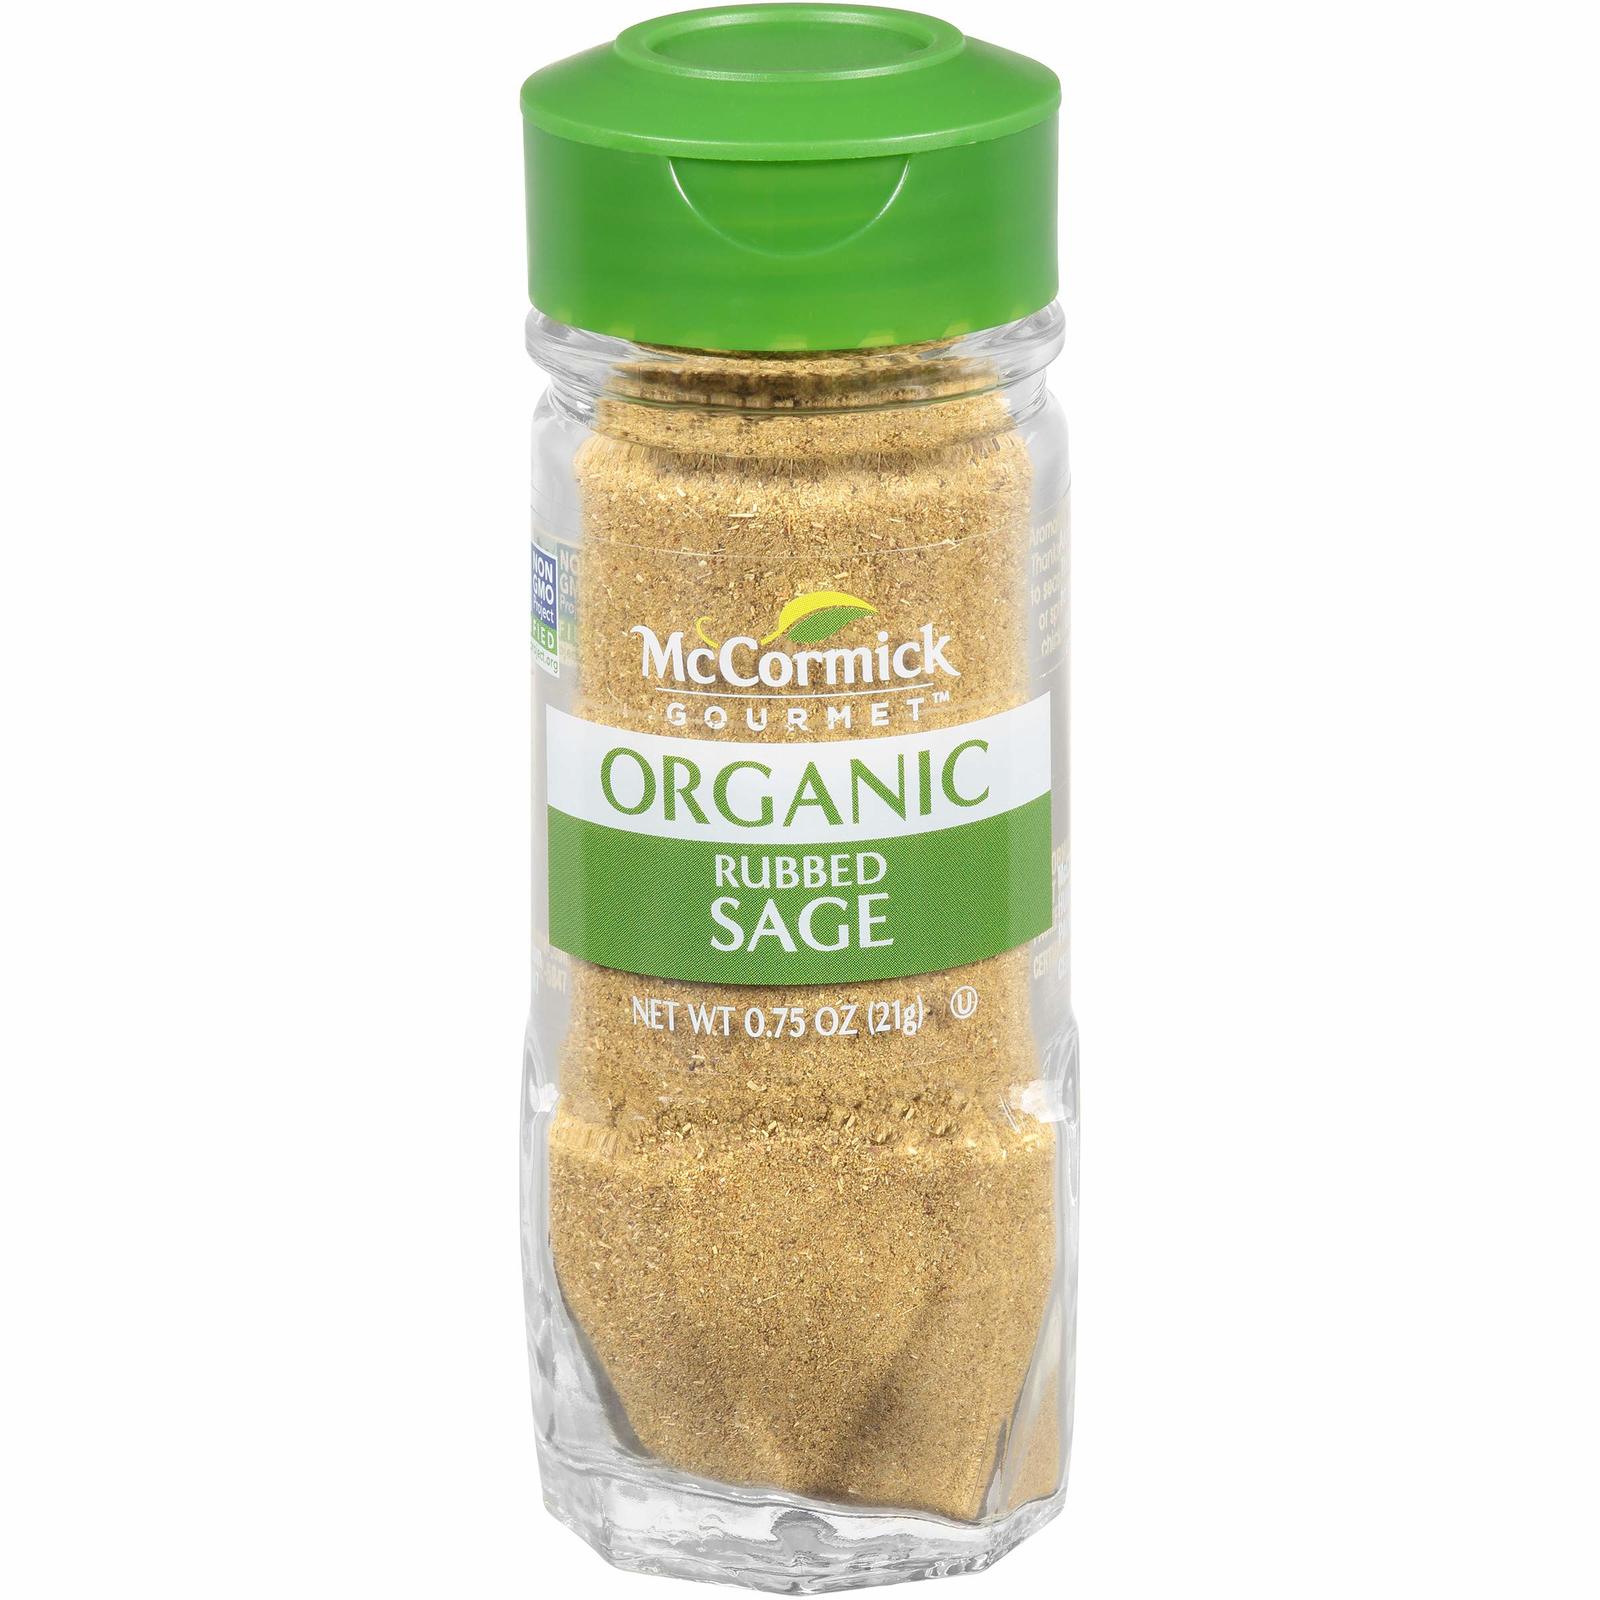 Primary image for McCormick Gourmet Organic Rubbed Sage, 0.75 oz